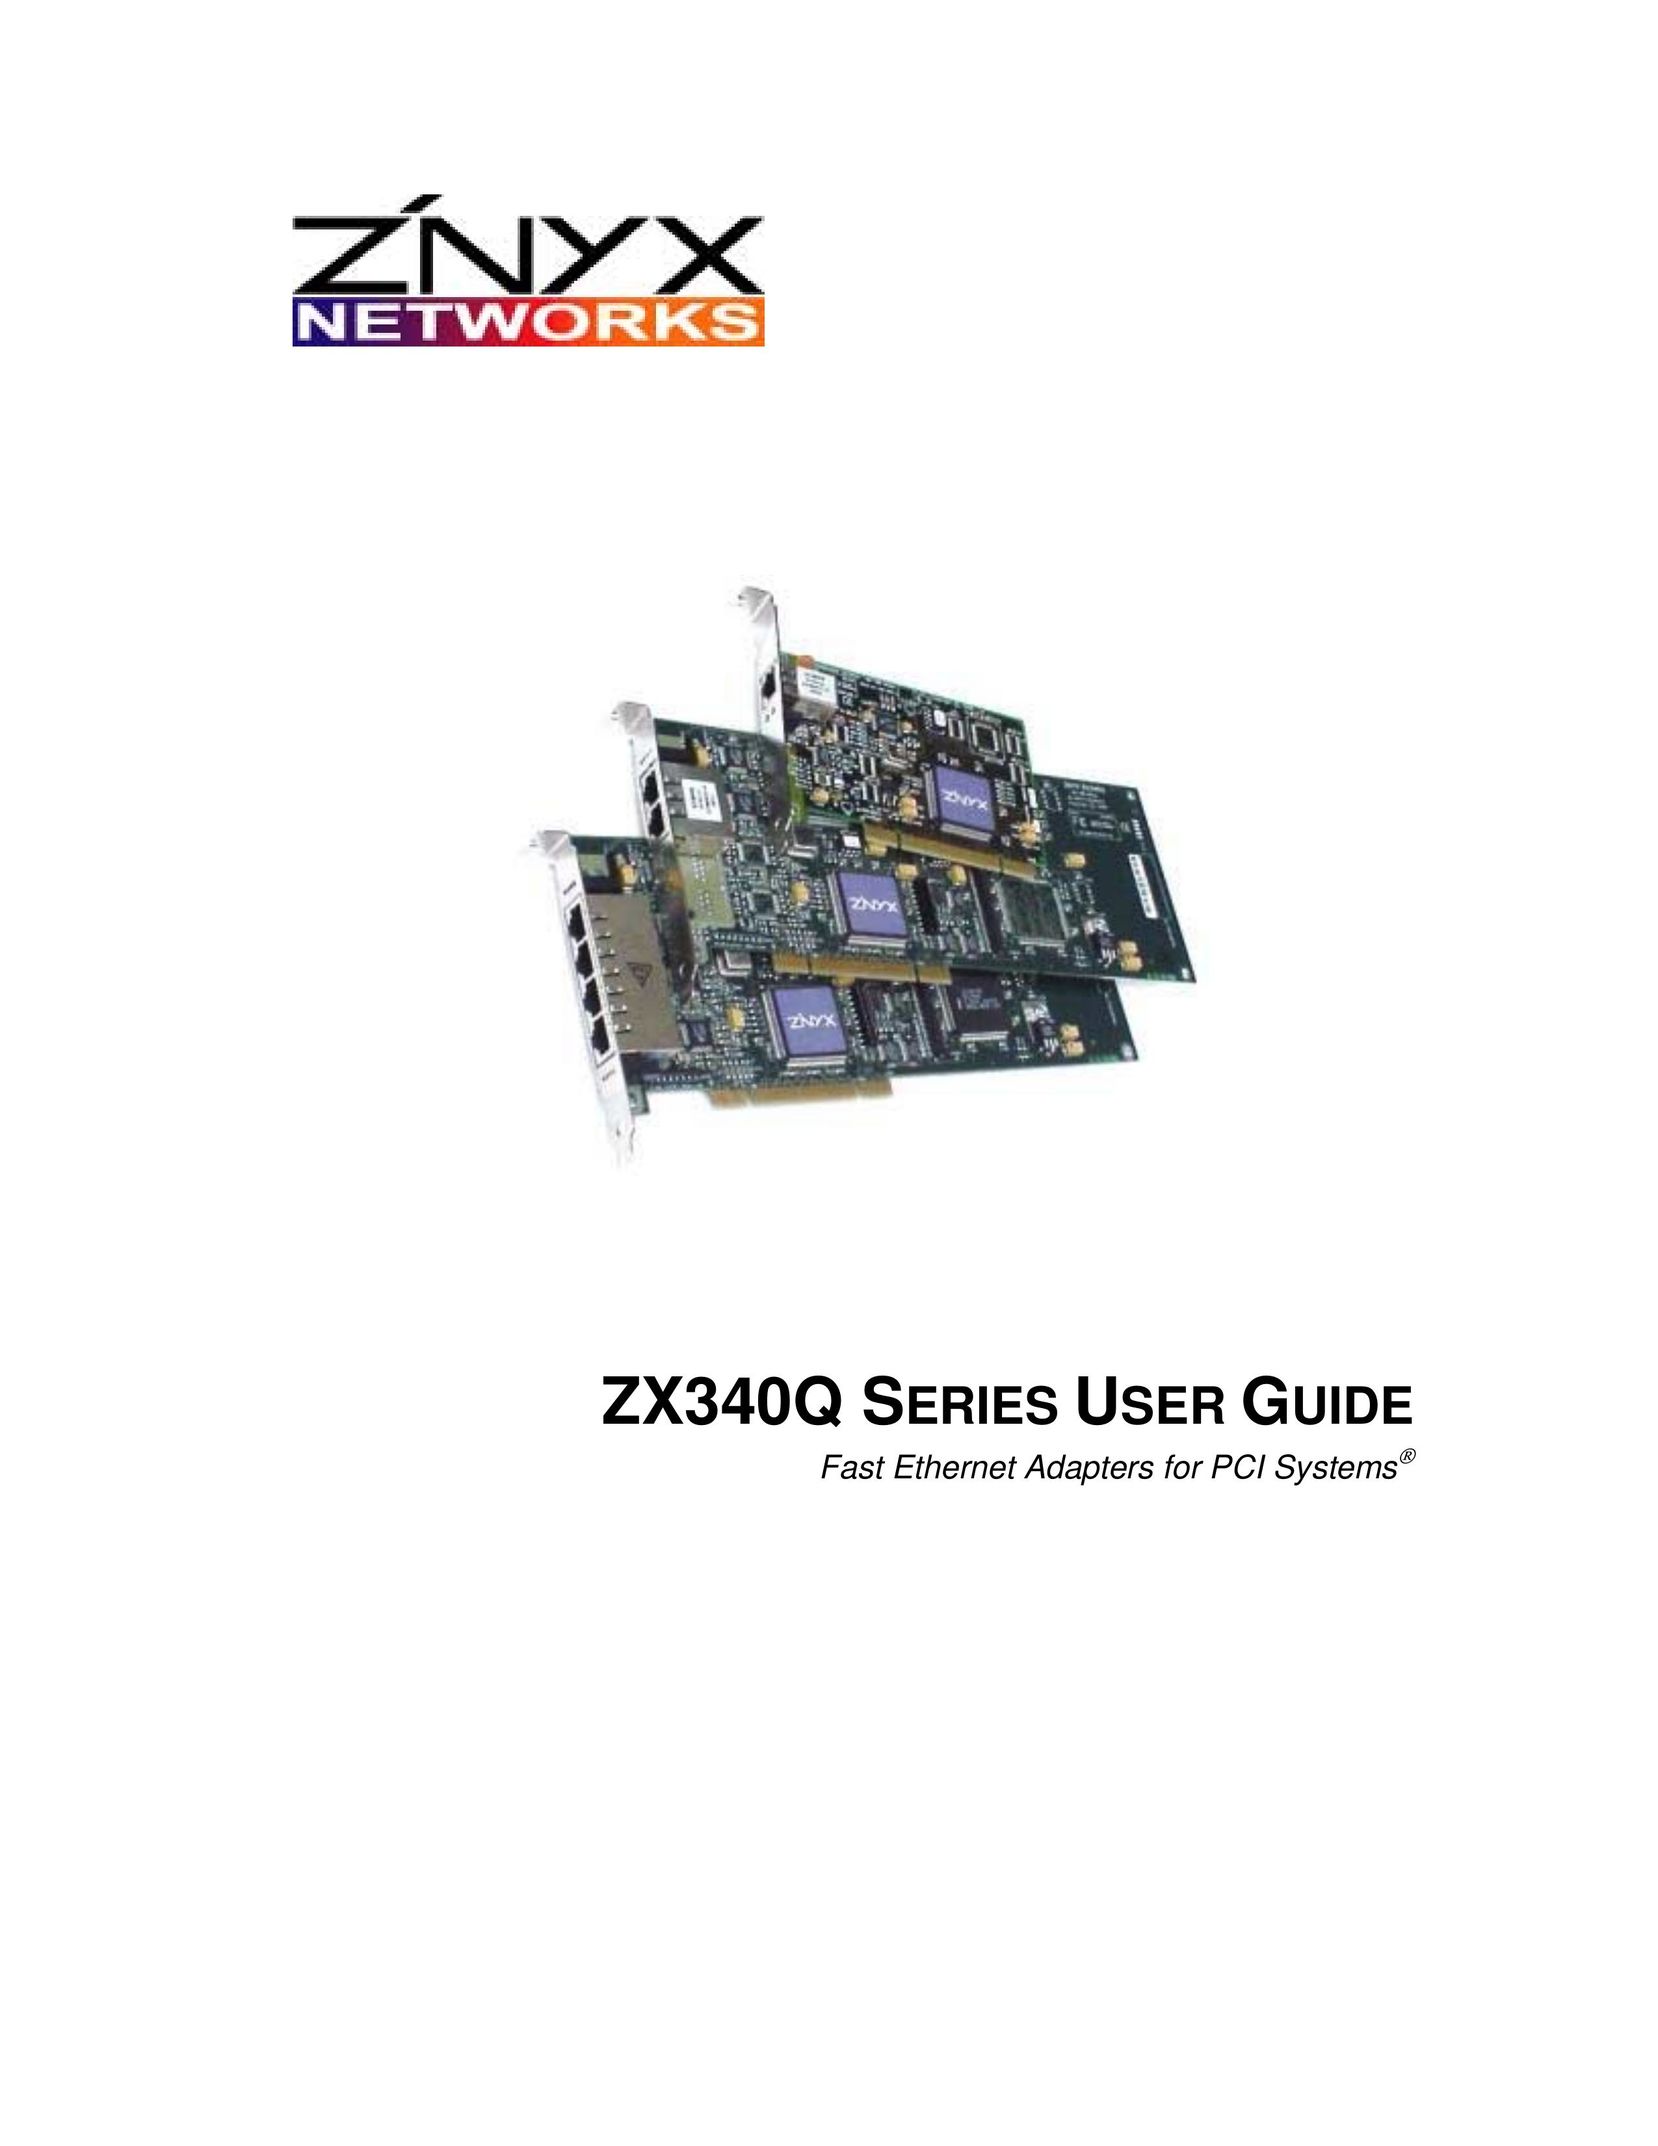 Znyx Networks ZX340Q Network Card User Manual